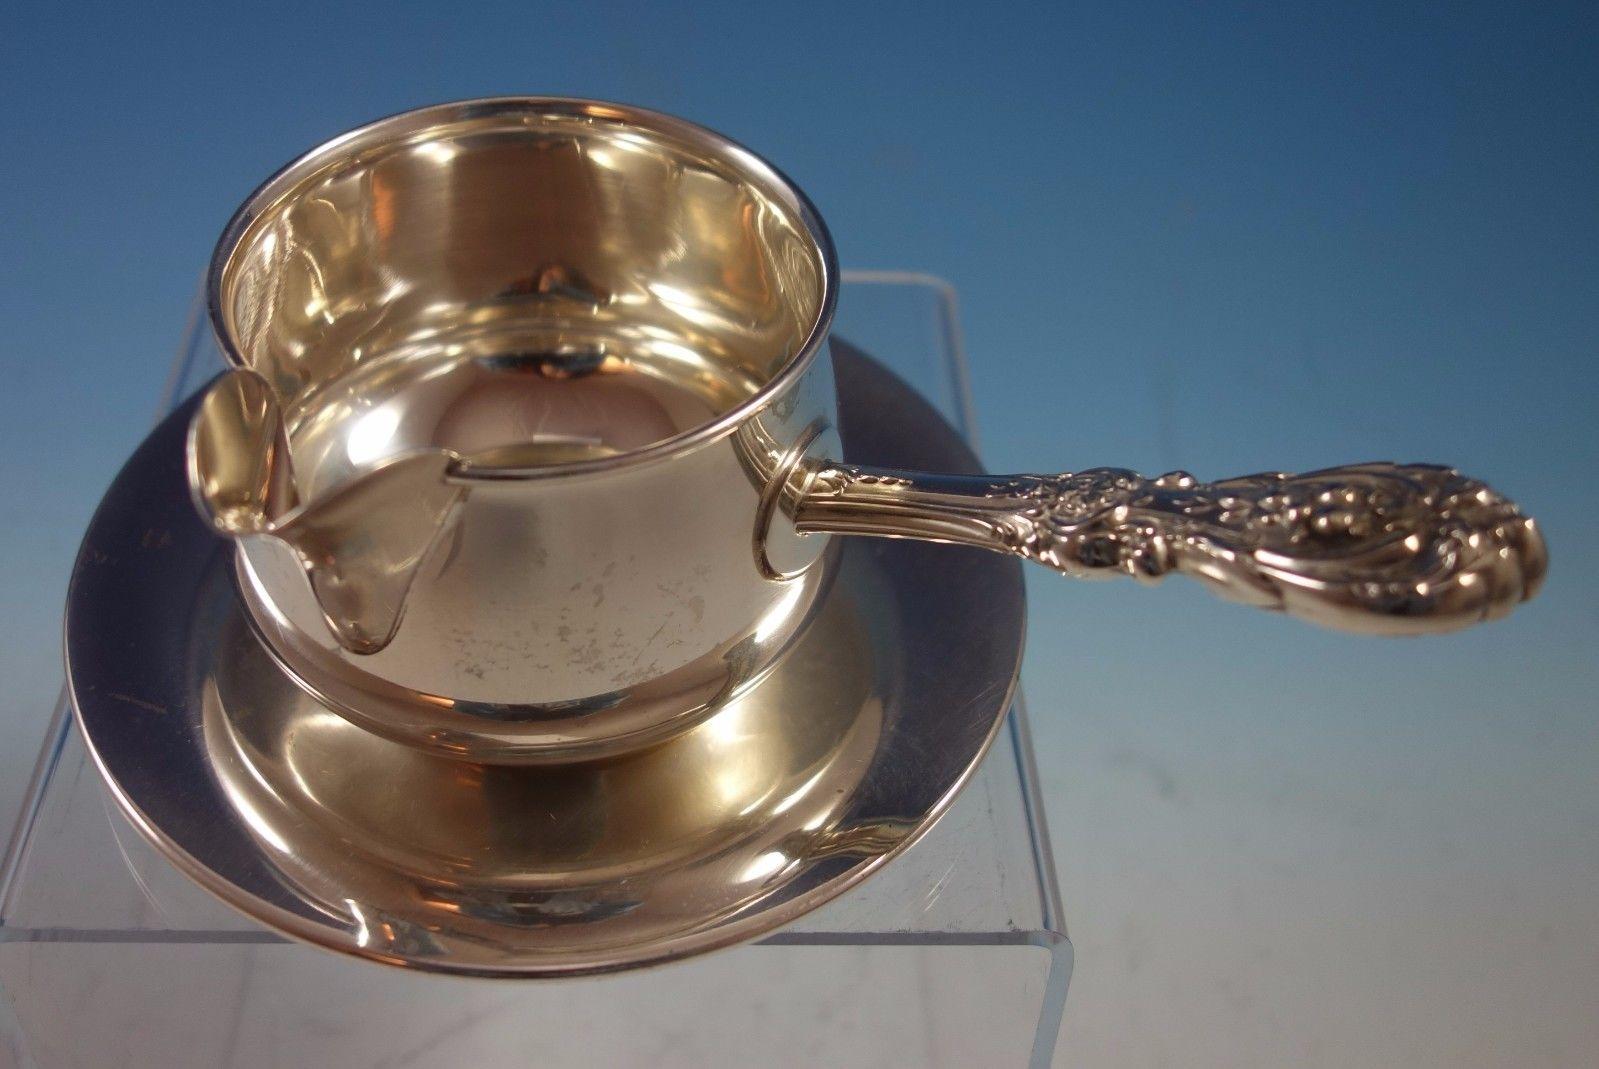 Francis I by Reed & Barton old mark sterling silver pipkin #569 and underplate. It' s rare to find an underplate. The total weight of the set is 4.6 ozt. The underplate measures 1/4